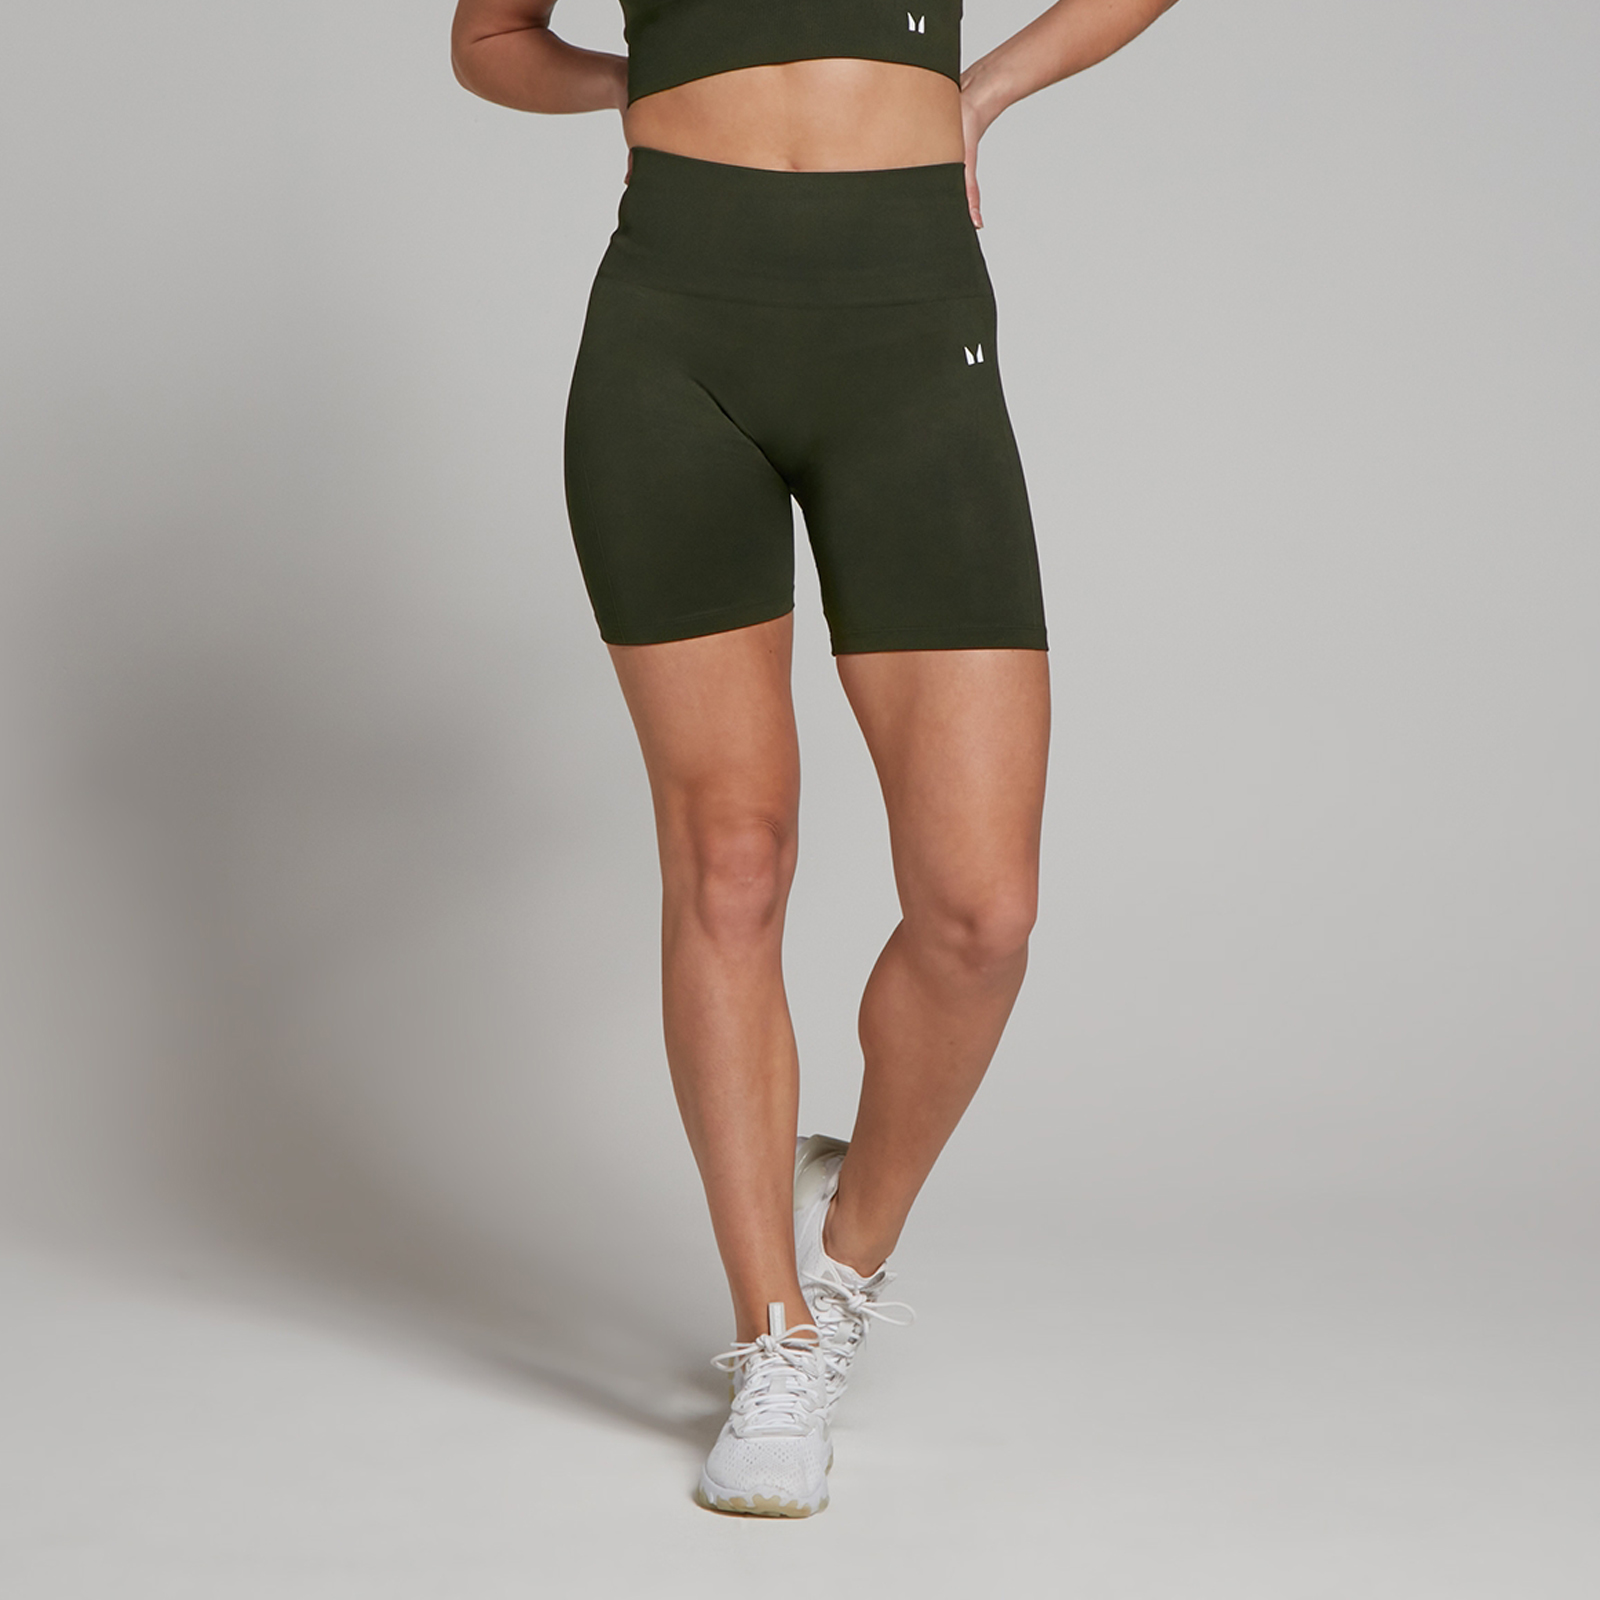 MP Women's Shape Seamless Cycling Shorts - Forest Green - XS von MP